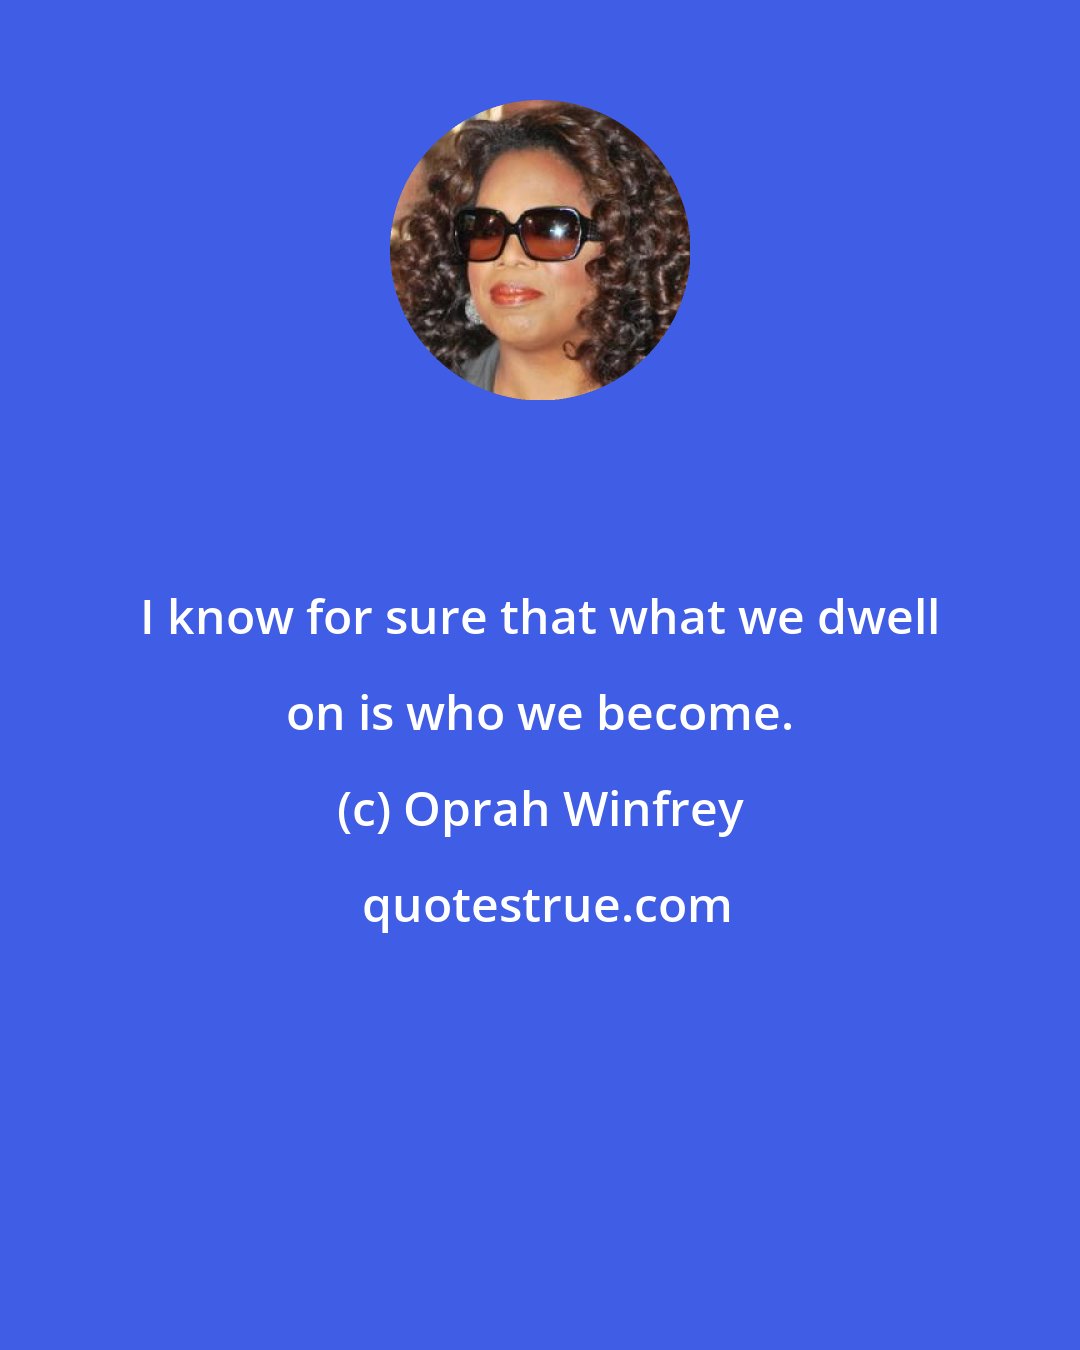 Oprah Winfrey: I know for sure that what we dwell on is who we become.